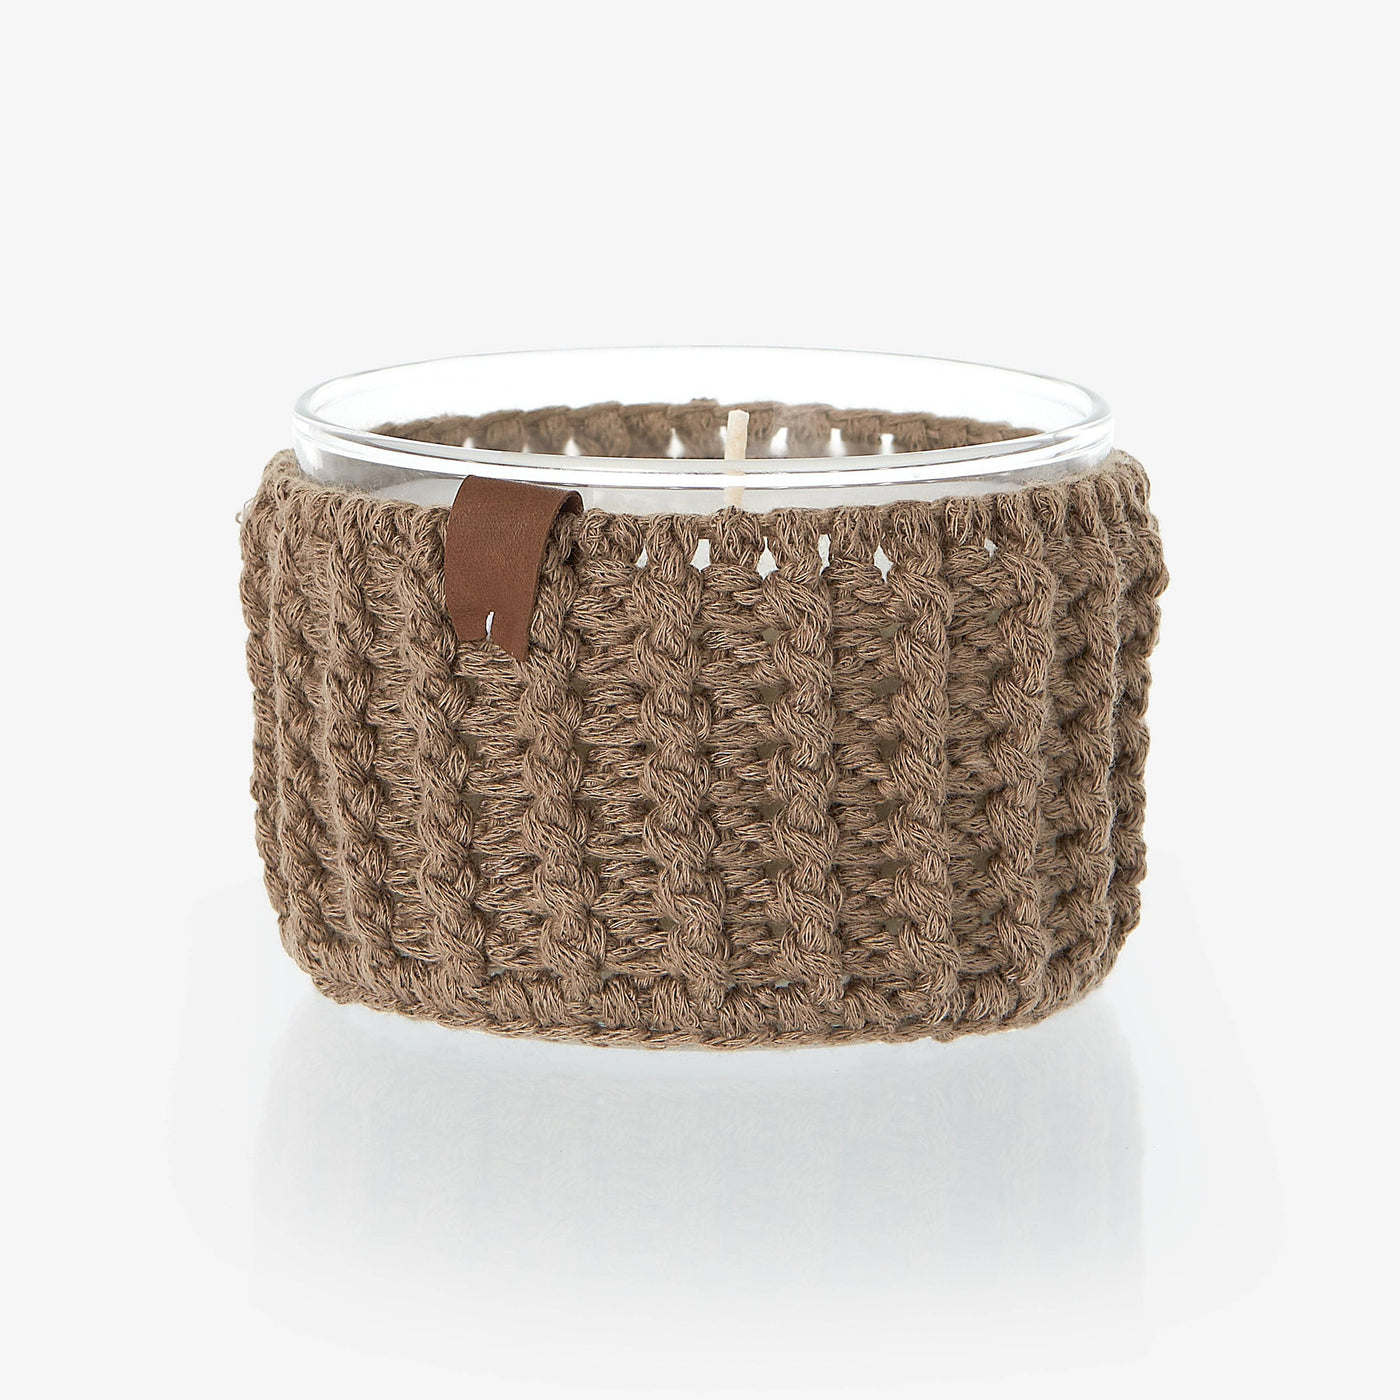 Hugga Knitted Candle, Brown, 300 g Candles sazy.com